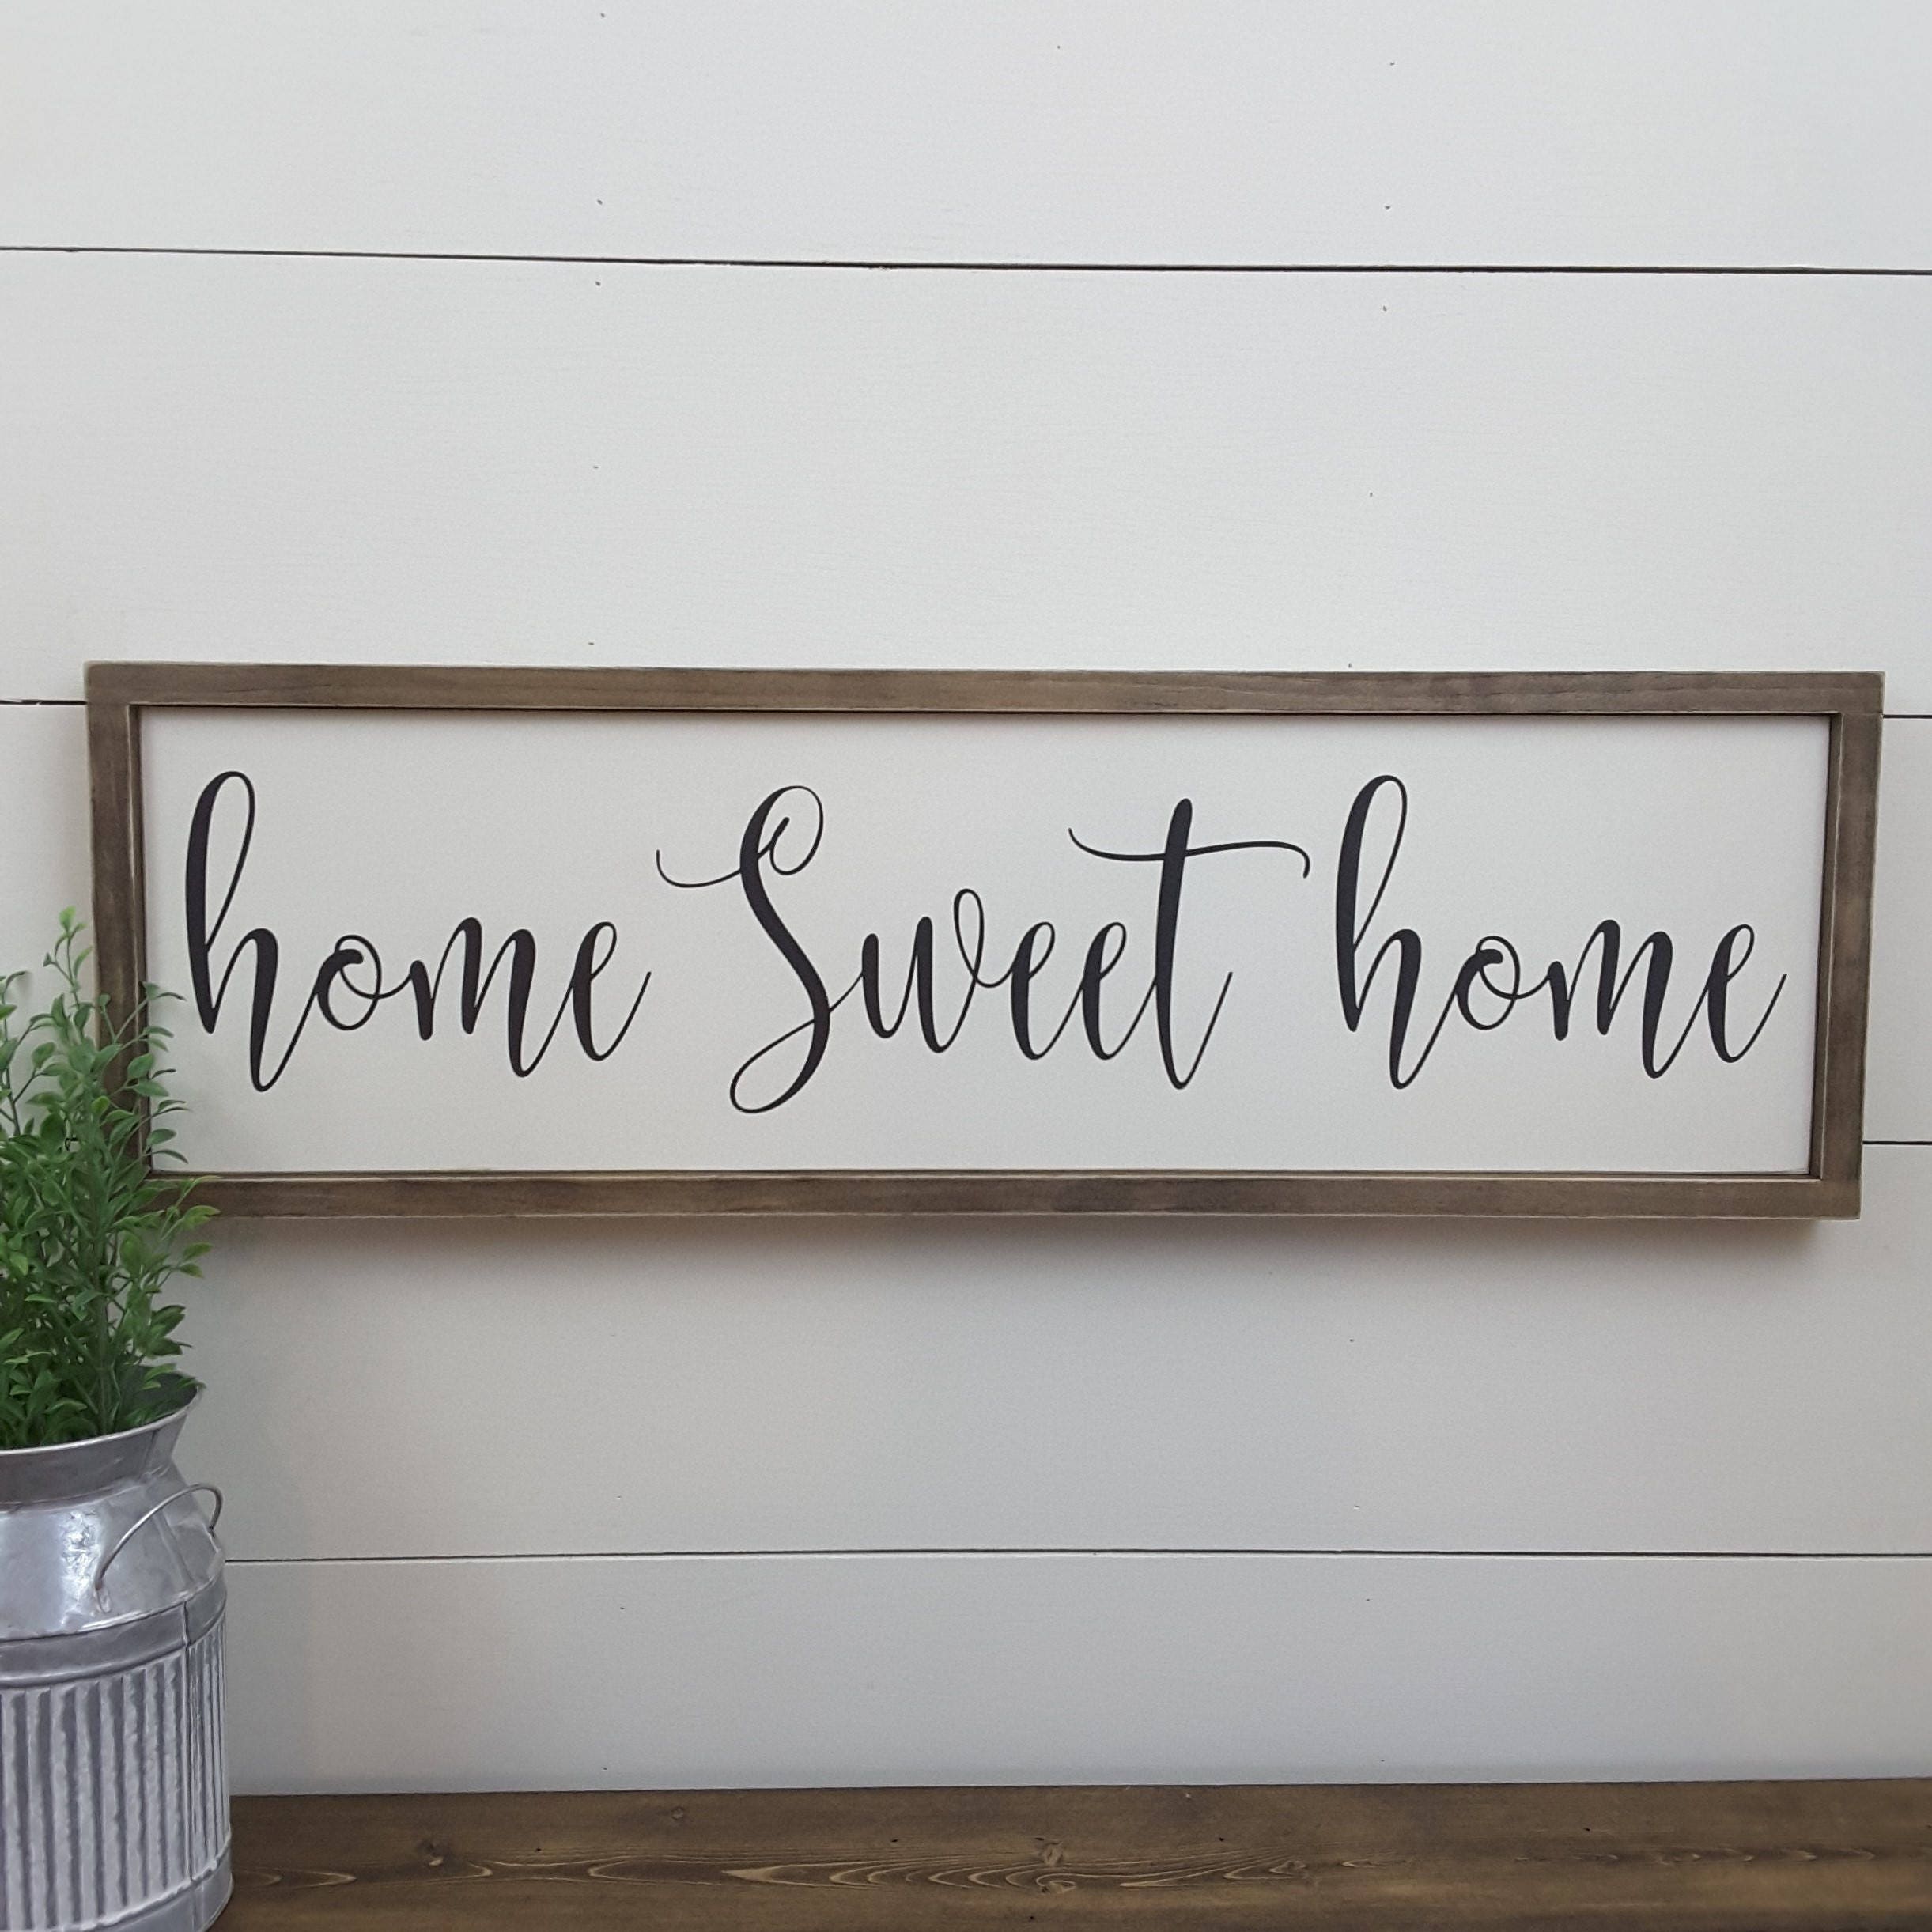 Home Sweet Home Sign With Vibrant Colors